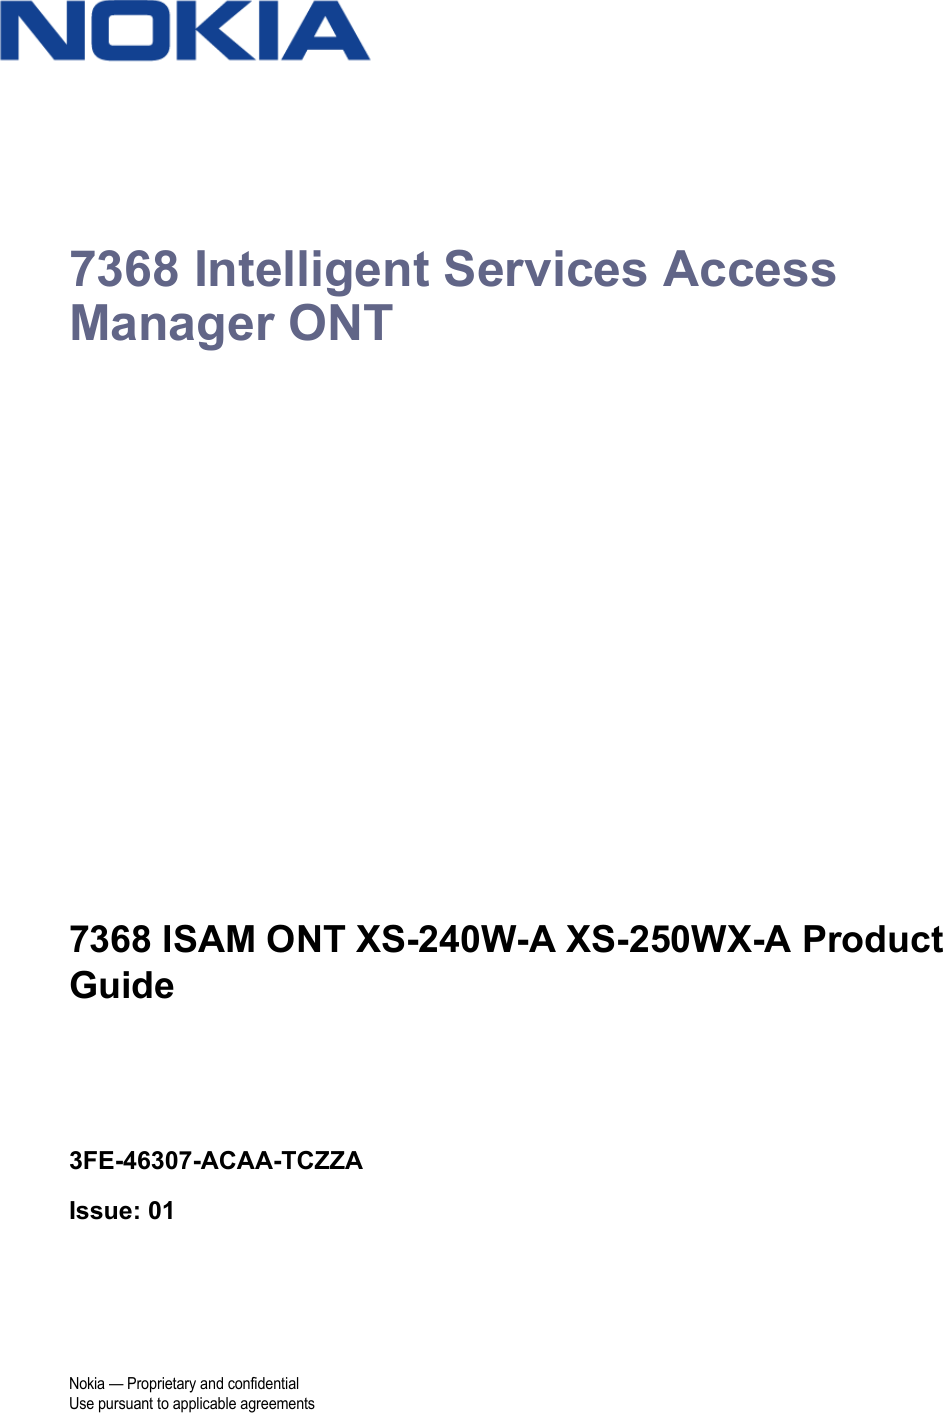 Nokia — Proprietary and confidentialUse pursuant to applicable agreements 7368 Intelligent Services Access Manager ONT7368 ISAM ONT XS-240W-A XS-250WX-A Product Guide3FE-46307-ACAA-TCZZAIssue: 01 7368 ISAM ONT XS-240W-A XS-250WX-A Product Guide